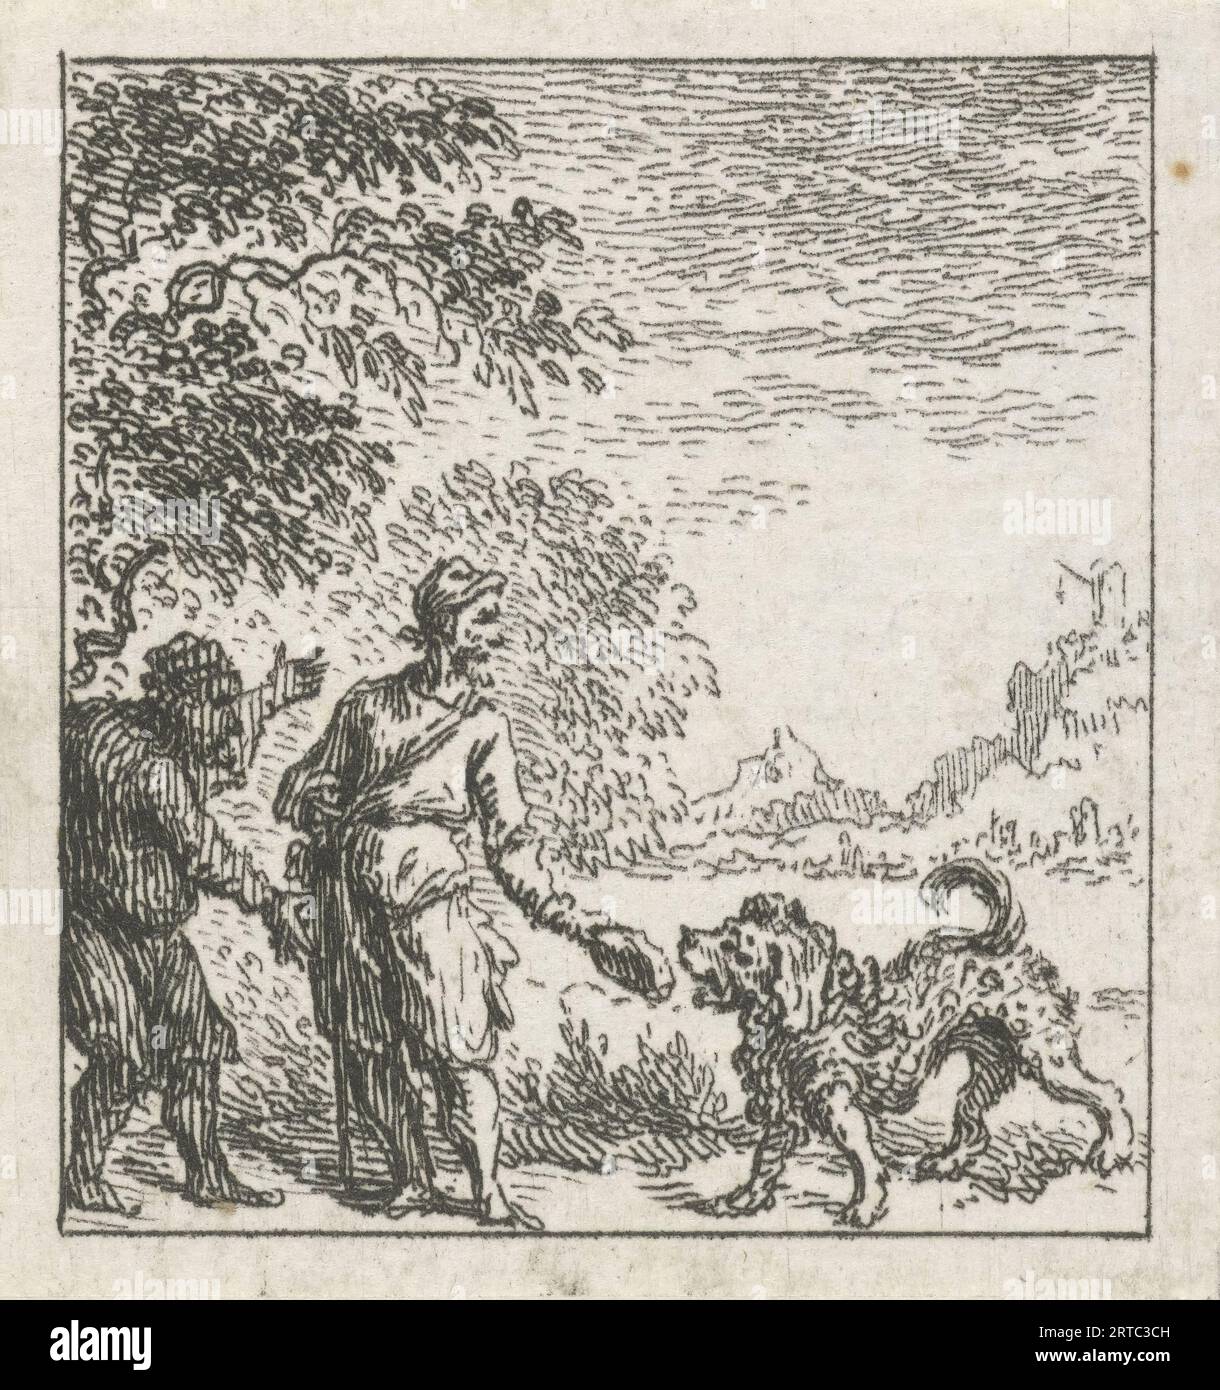 Fable of the Man and the Dog, Illustrations for Fable Tales of Phaedrus (series title), A man feeds a dog, next to him is a second man who keeps his hands up in terror, This illustration was made in the Aesopian fables of the Latin poet Phaedrus, fables. Simon Fokke (1712-1784) was a Dutch designer, etcher, and engraver. Born in Amsterdam, The Netherlands. Discover the enchanting world of Phaedrus' fables, where timeless wisdom meets captivating storytelling. In 'The Fables of Phaedrus,' you'll embark on a journey through the vivid landscapes of ancient Rome Stock Photo